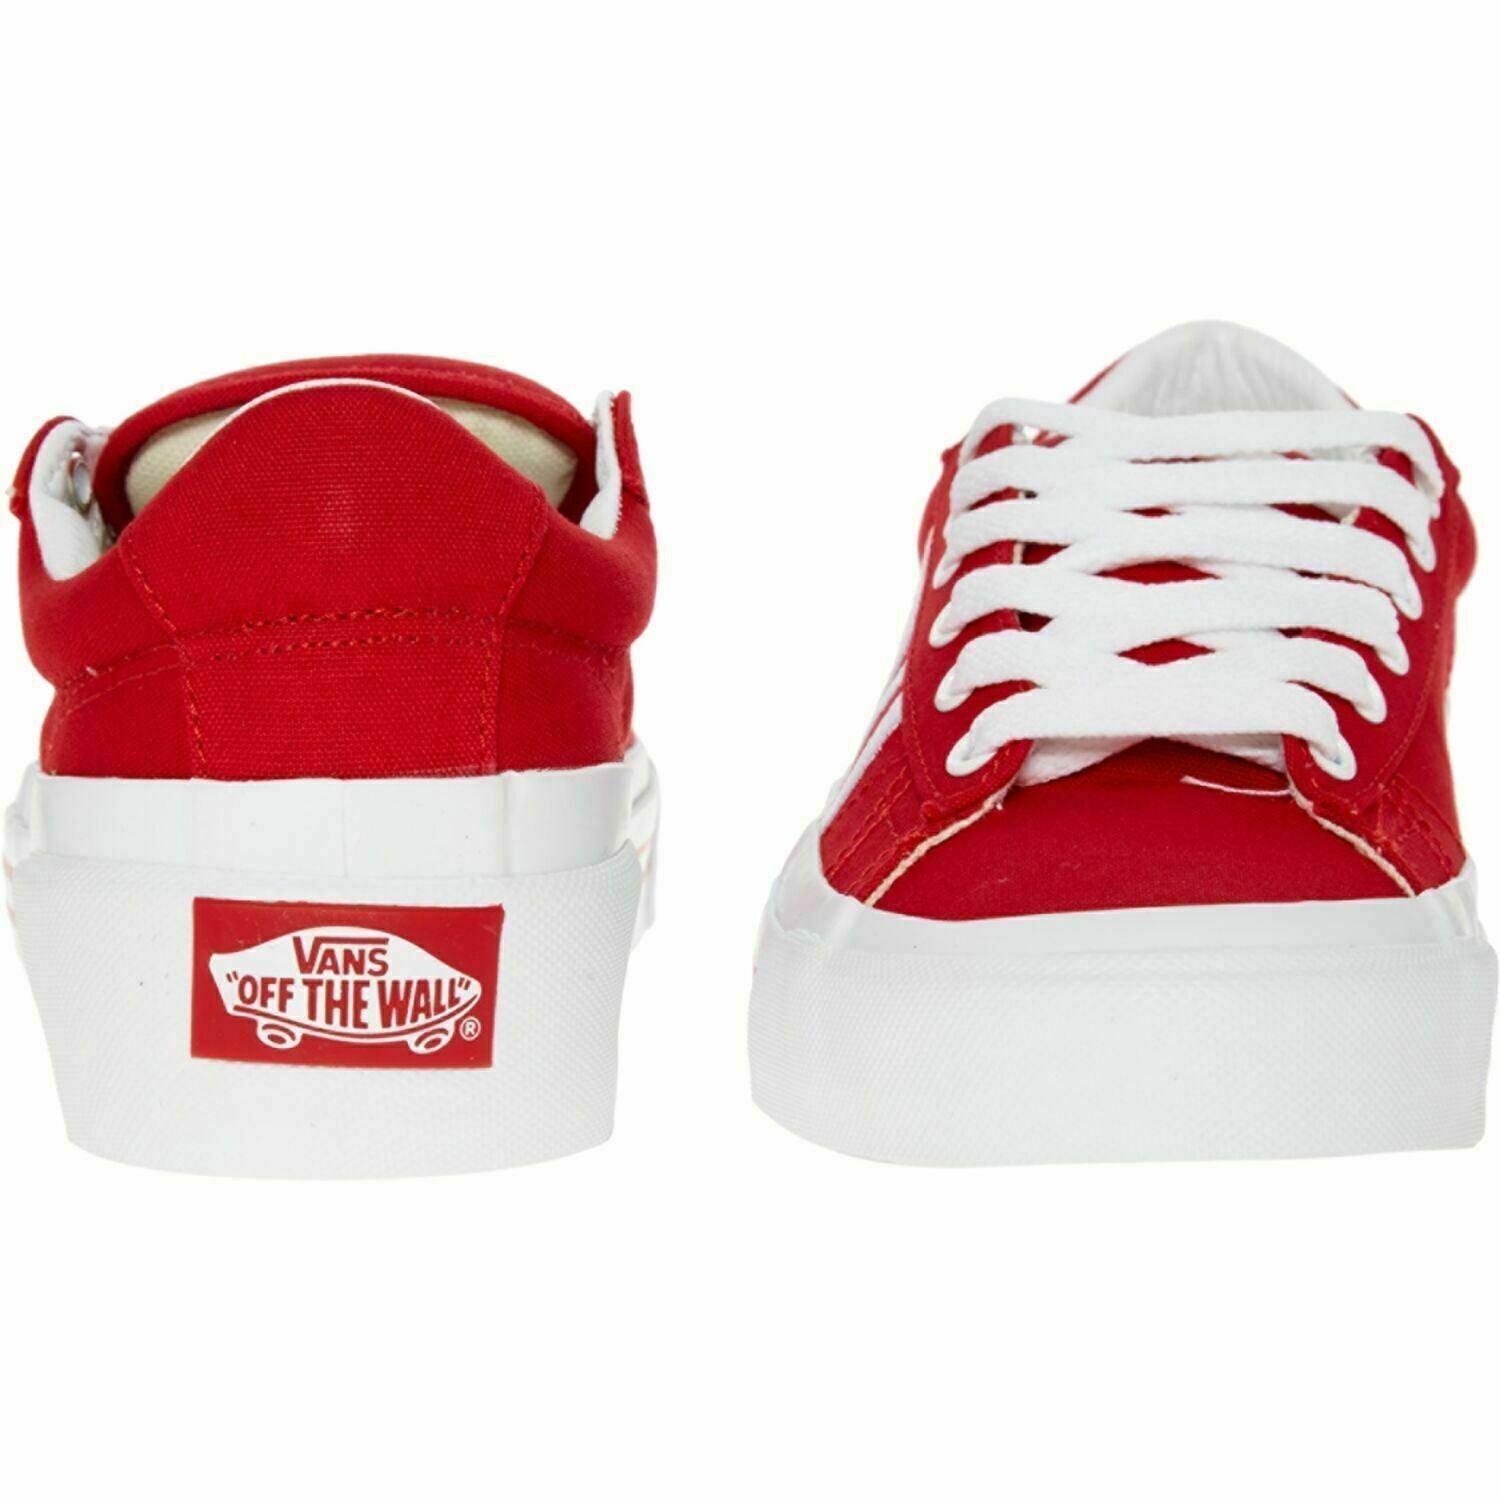 Women's Vans Sid Ni Red & White Thick Sole Trainers UK 3.5 EUR 36  USA 6